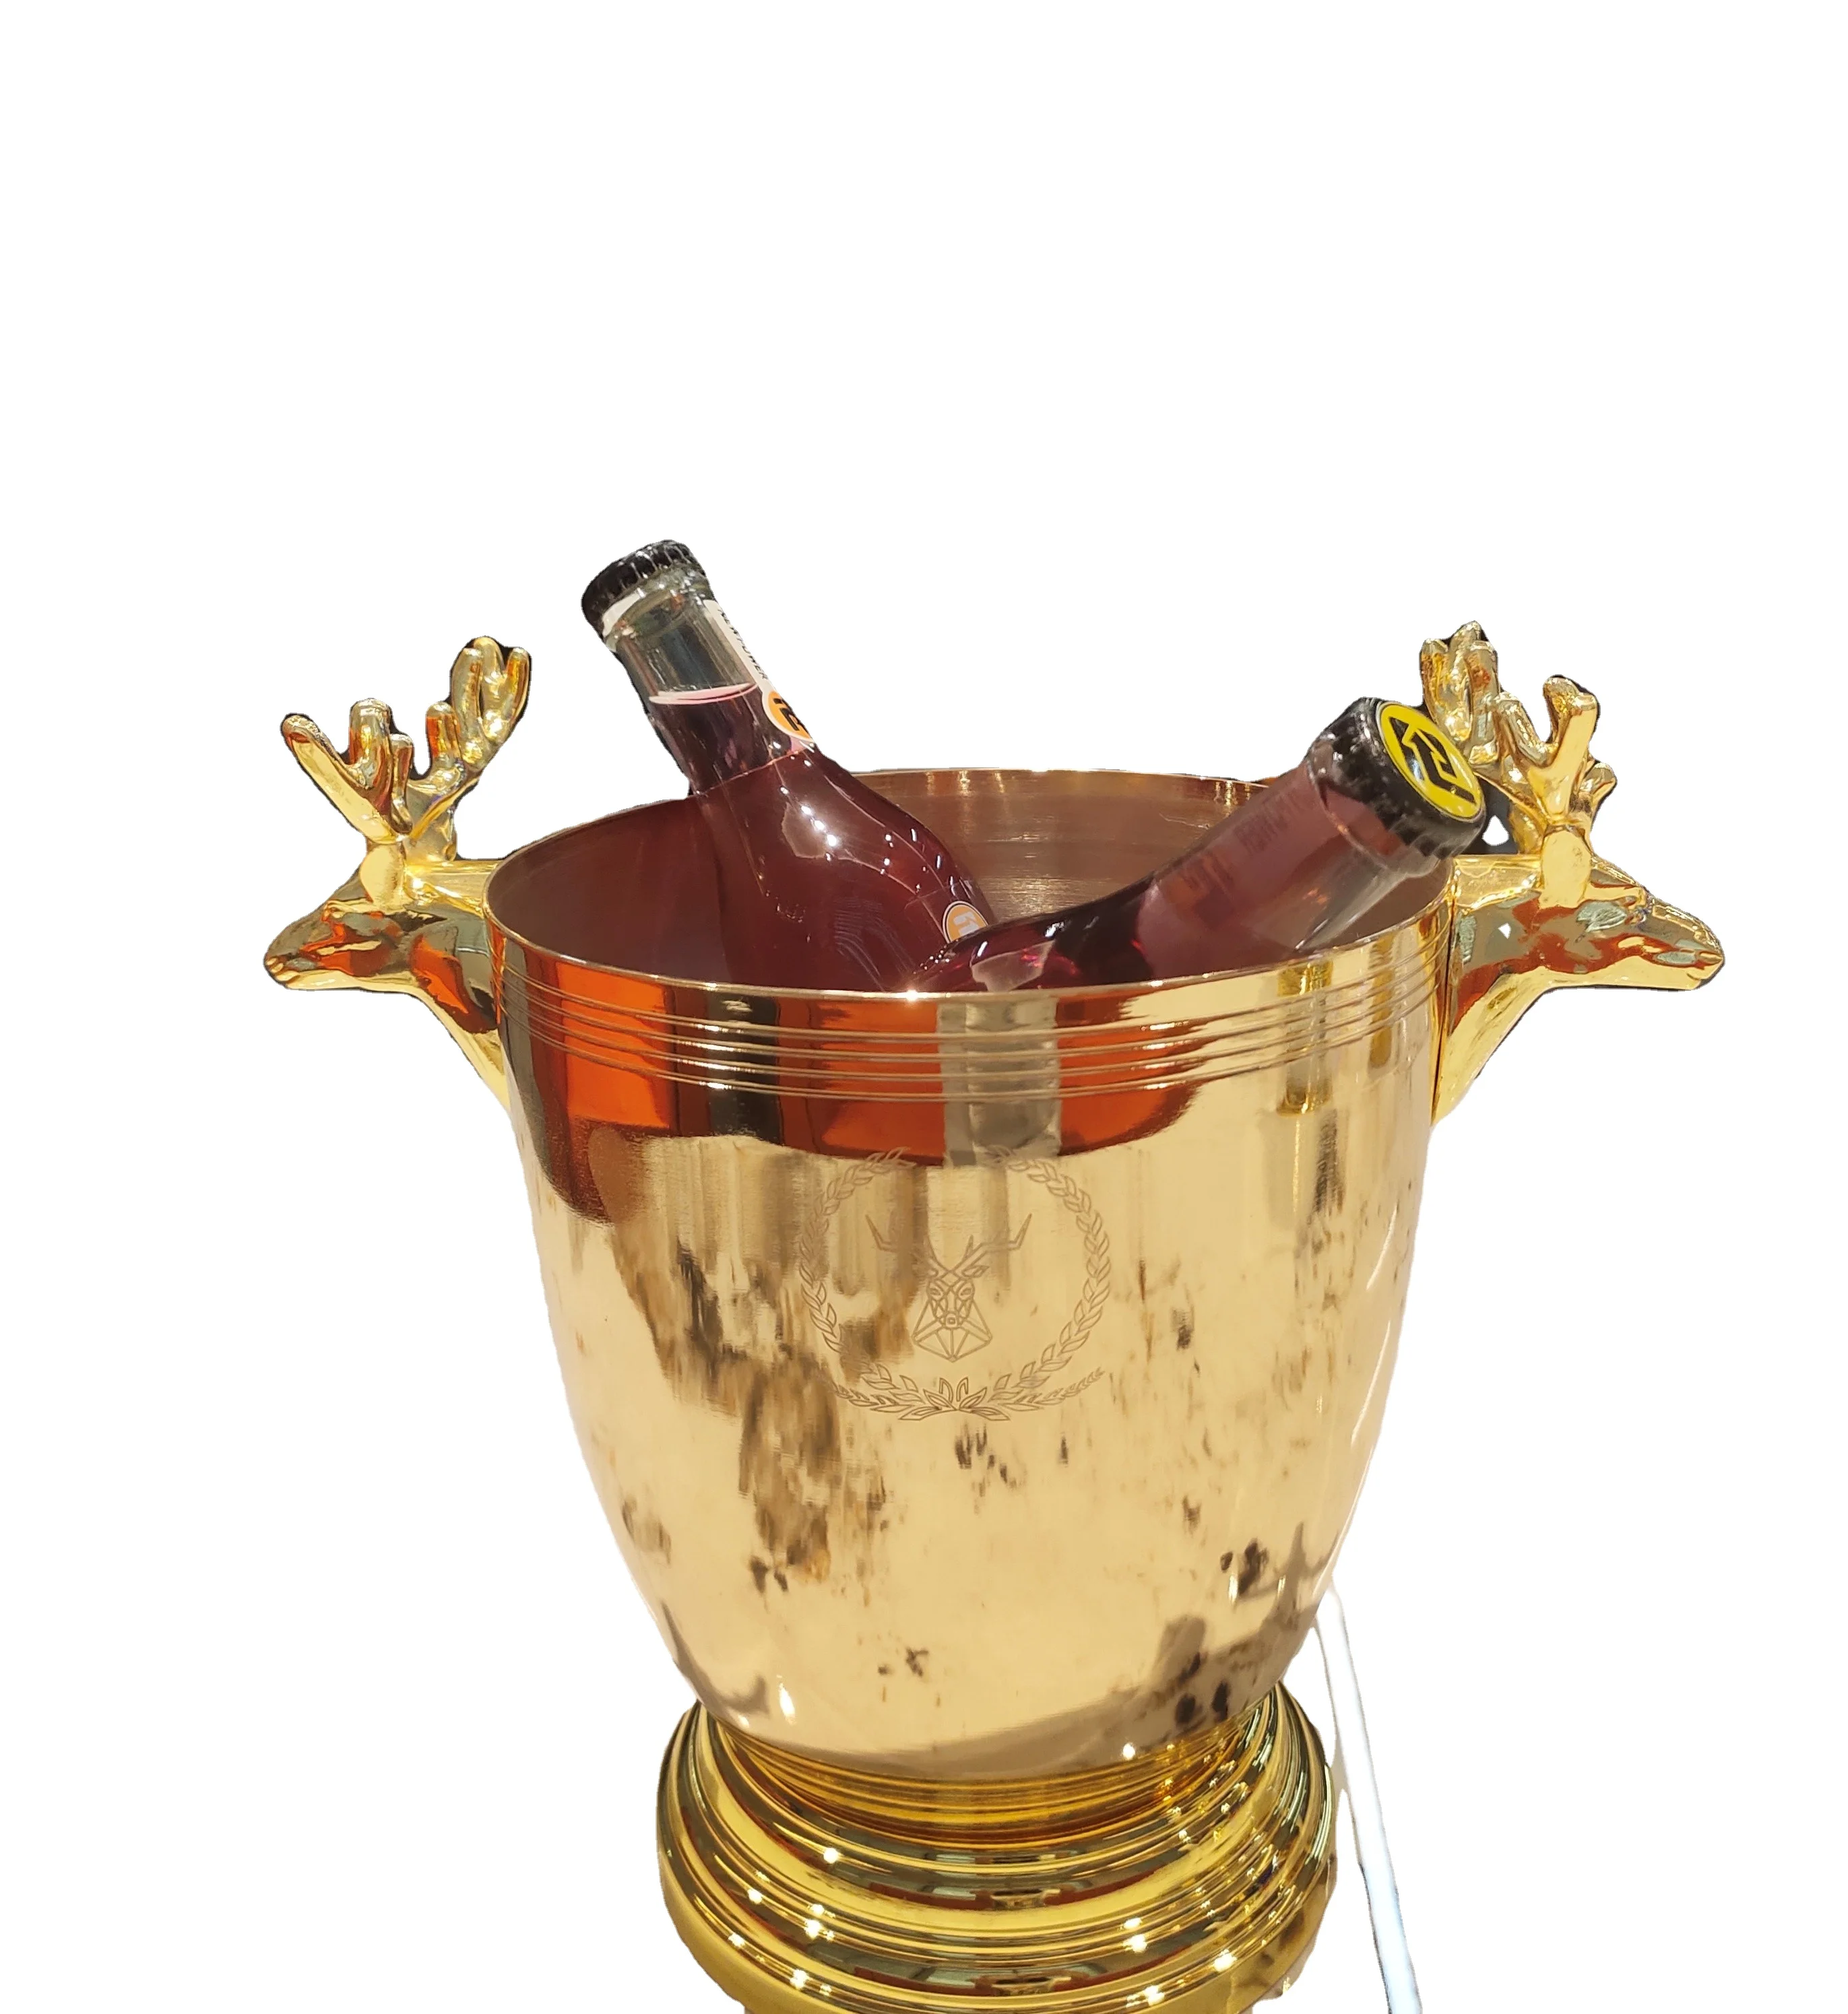 

Deer Design Handle Stainless Steel Ice Bucket for Beer Champagne Bucket with Silver & Gold Color Ice bucket